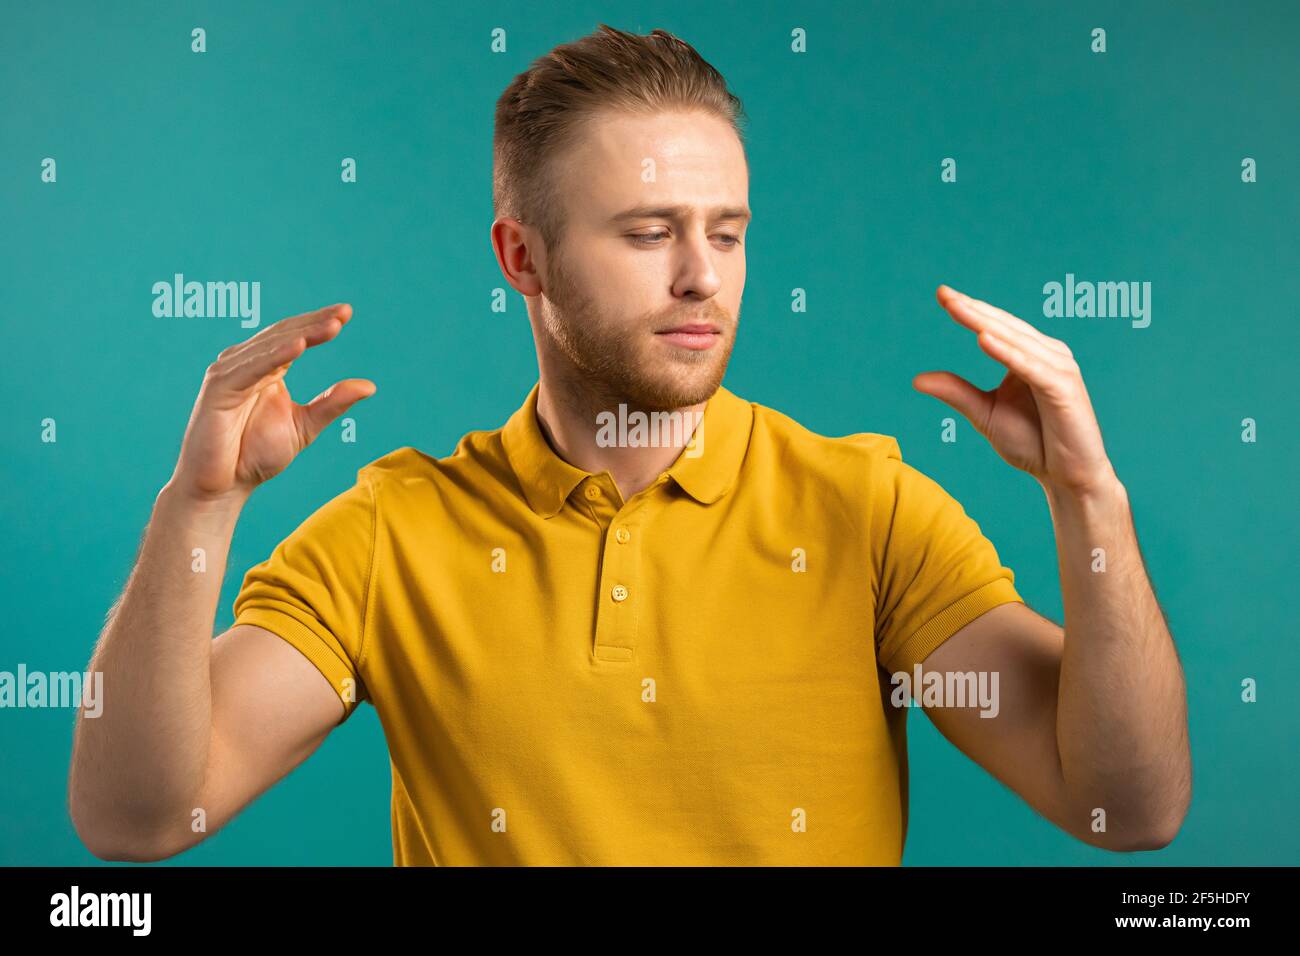 Handsome bored man showing bla-bla-bla gesture with hands isolated on blue background. Empty promises, blah concept. Lier Stock Photo